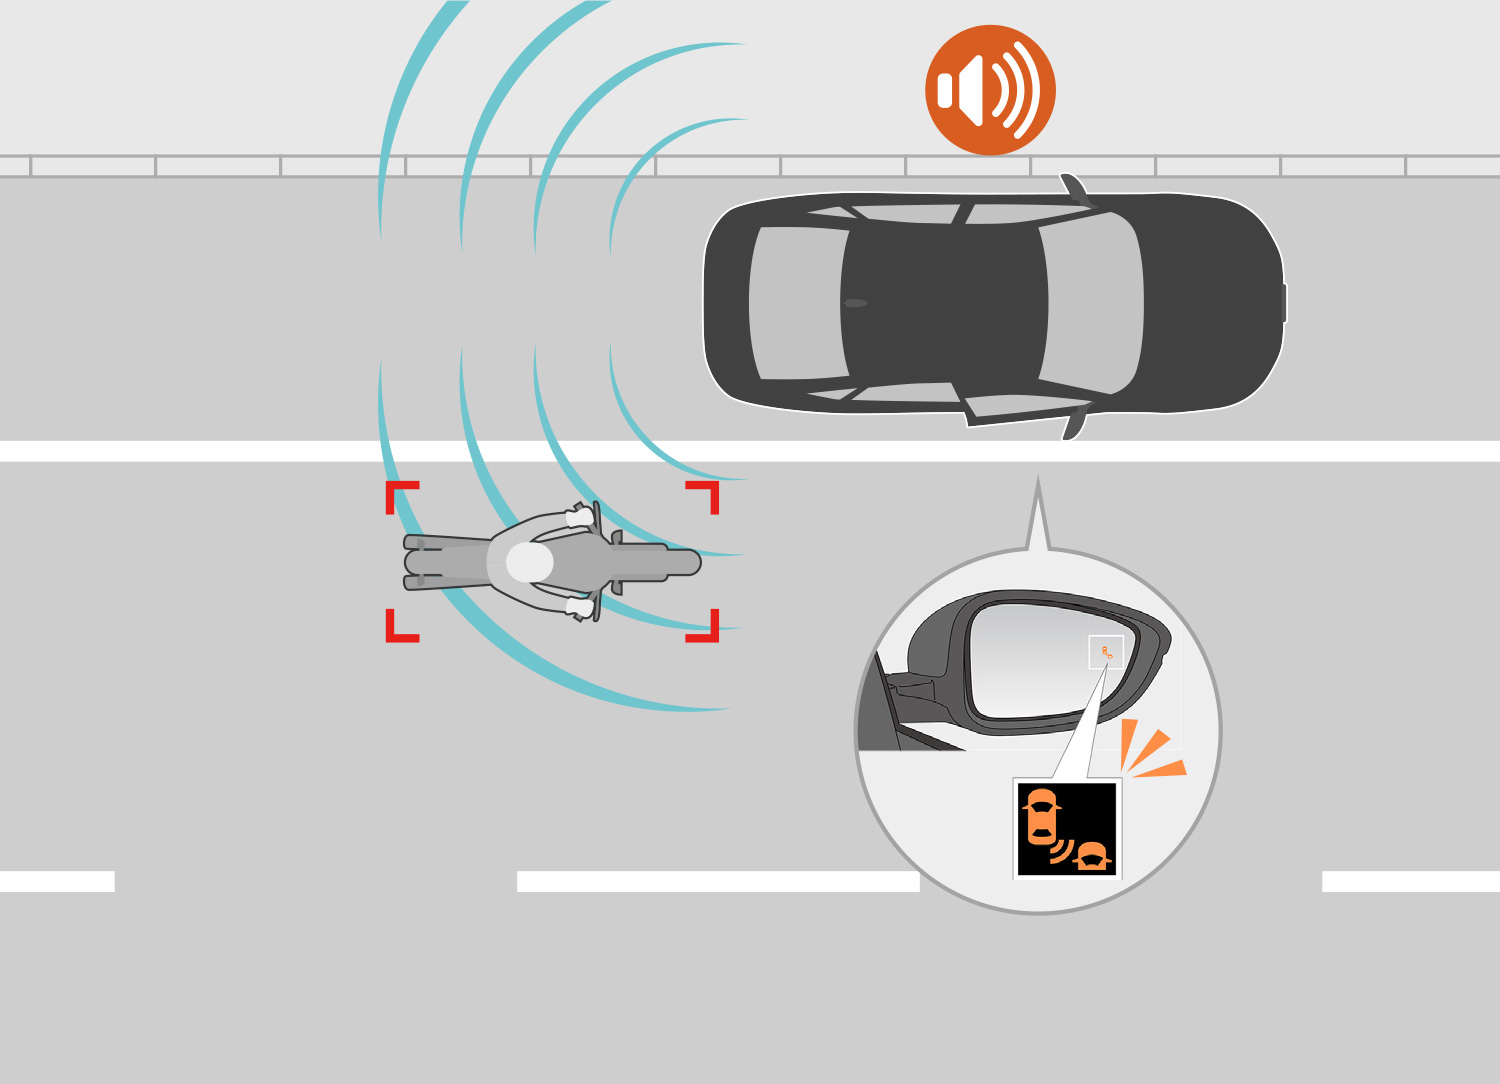 The system lights up the indicator on the side where other vehicles are detected and provides audible warnings.